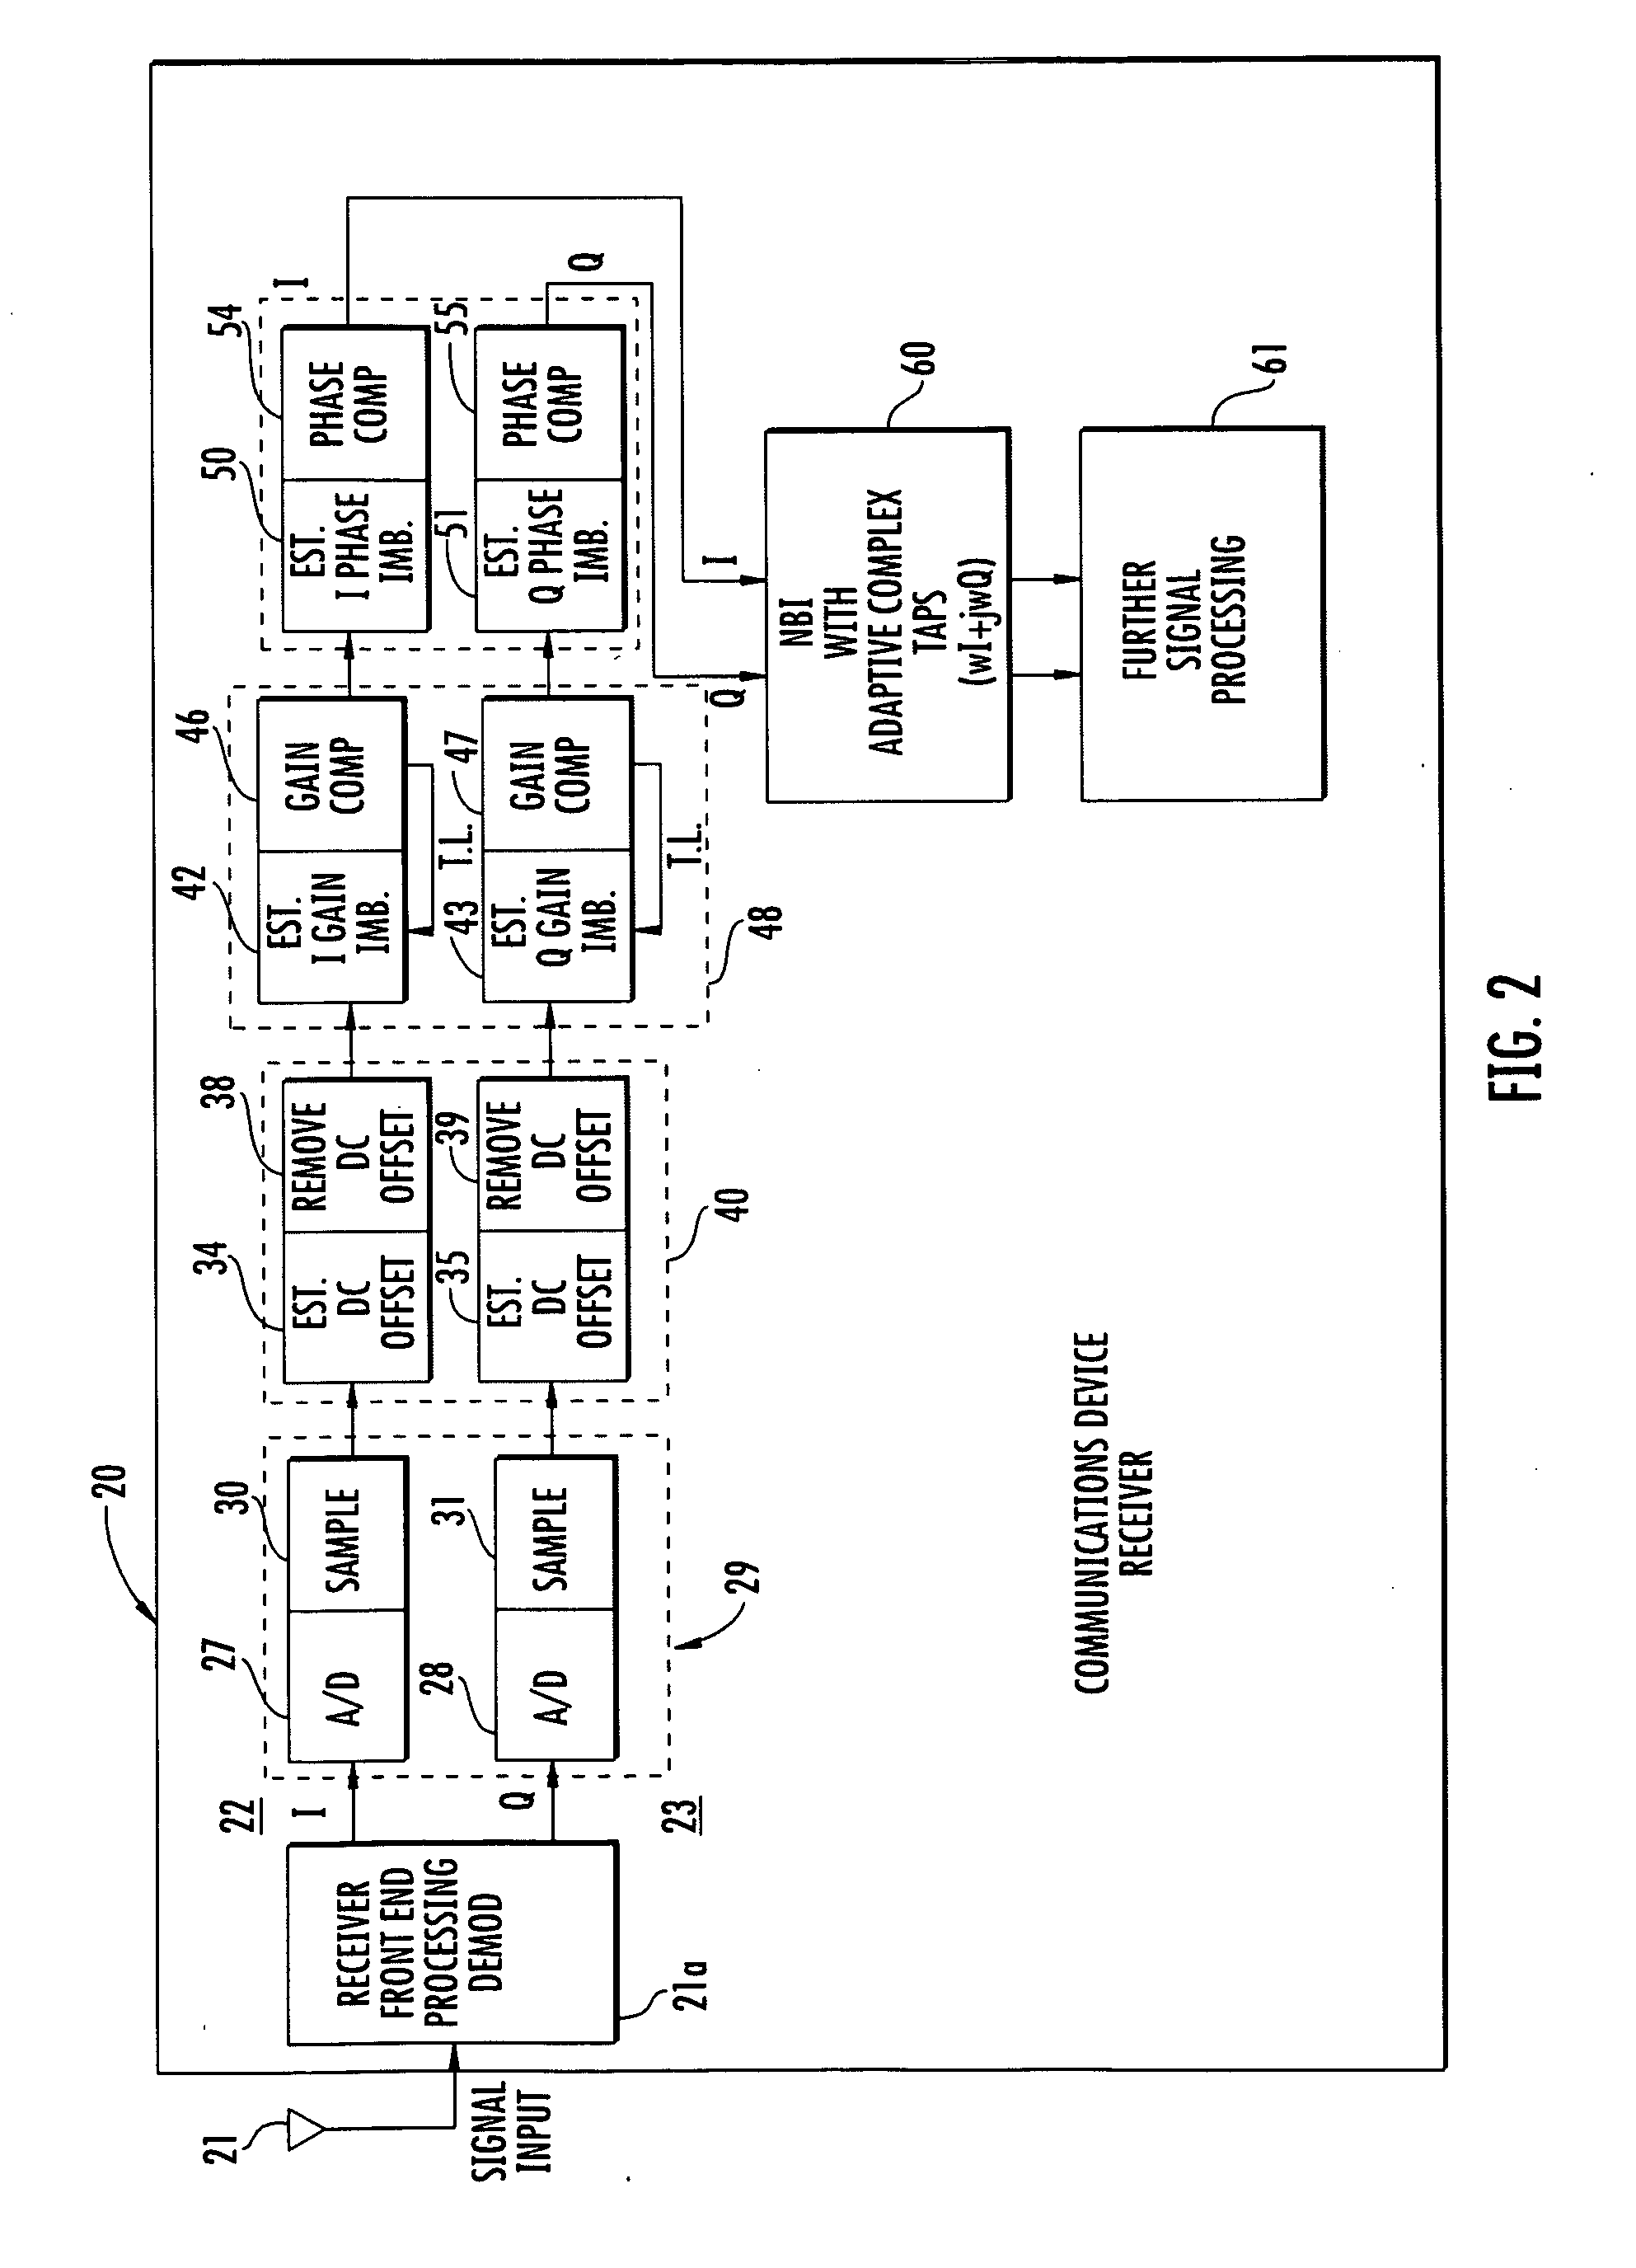 Communications device with in-phase/quadrature (i/q) DC offset, gain and phase imbalance compensation and related method